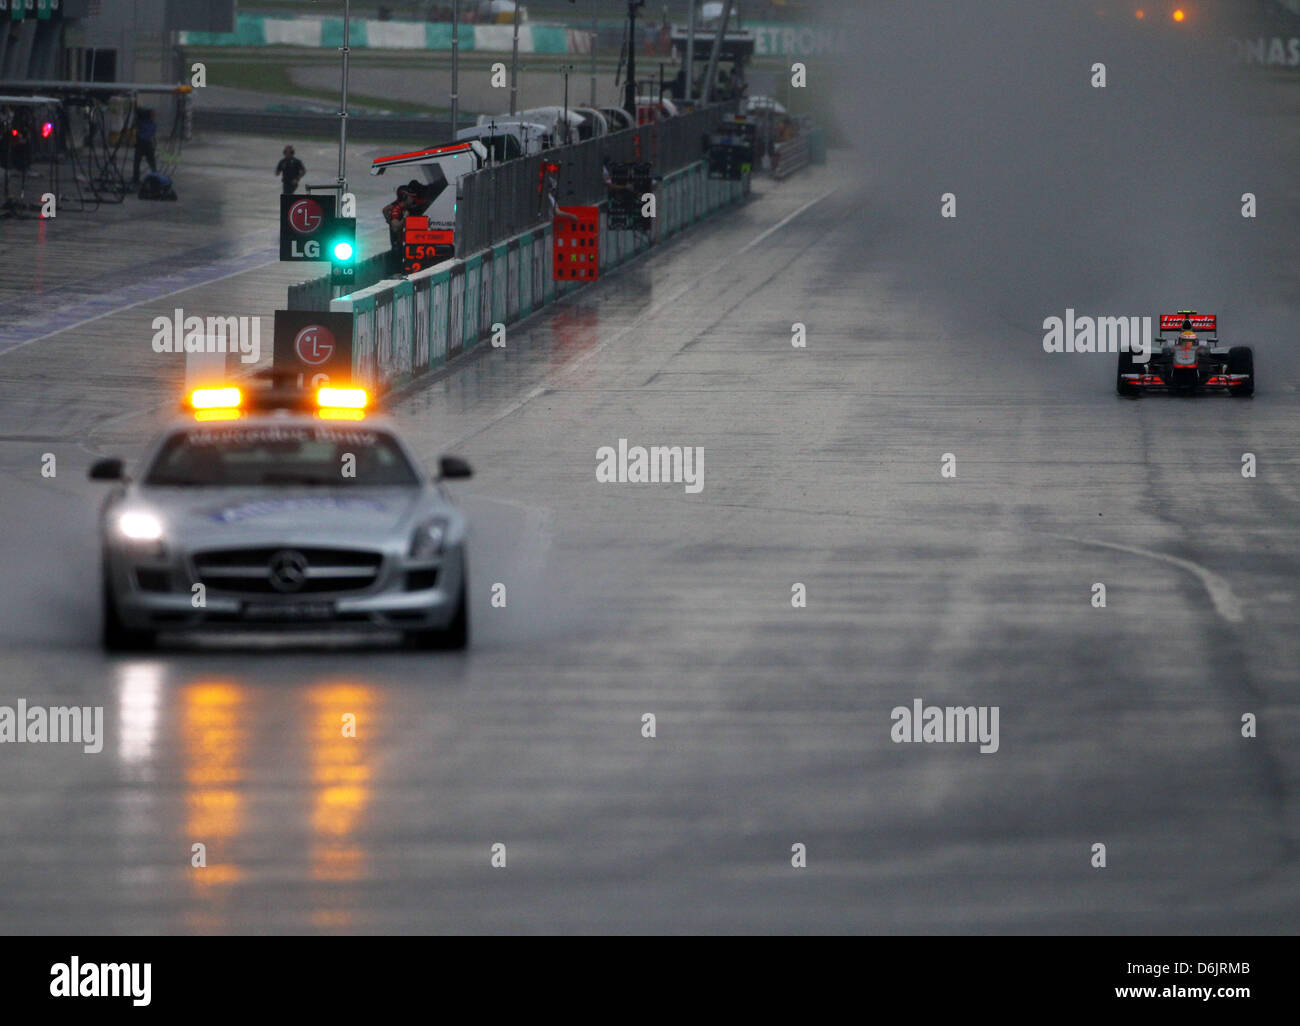 The safety car is back on track in front of the British Formula One driver Lewis Hamilton of McLaren Mercedes during the Formula One Grand Prix of Malaysia at the Sepang circuit, outside Kuala Lumpur, Malaysia, 25 March 2012. Photo: Jens Buettner dpa  +++(c) dpa - Bildfunk+++ Stock Photo